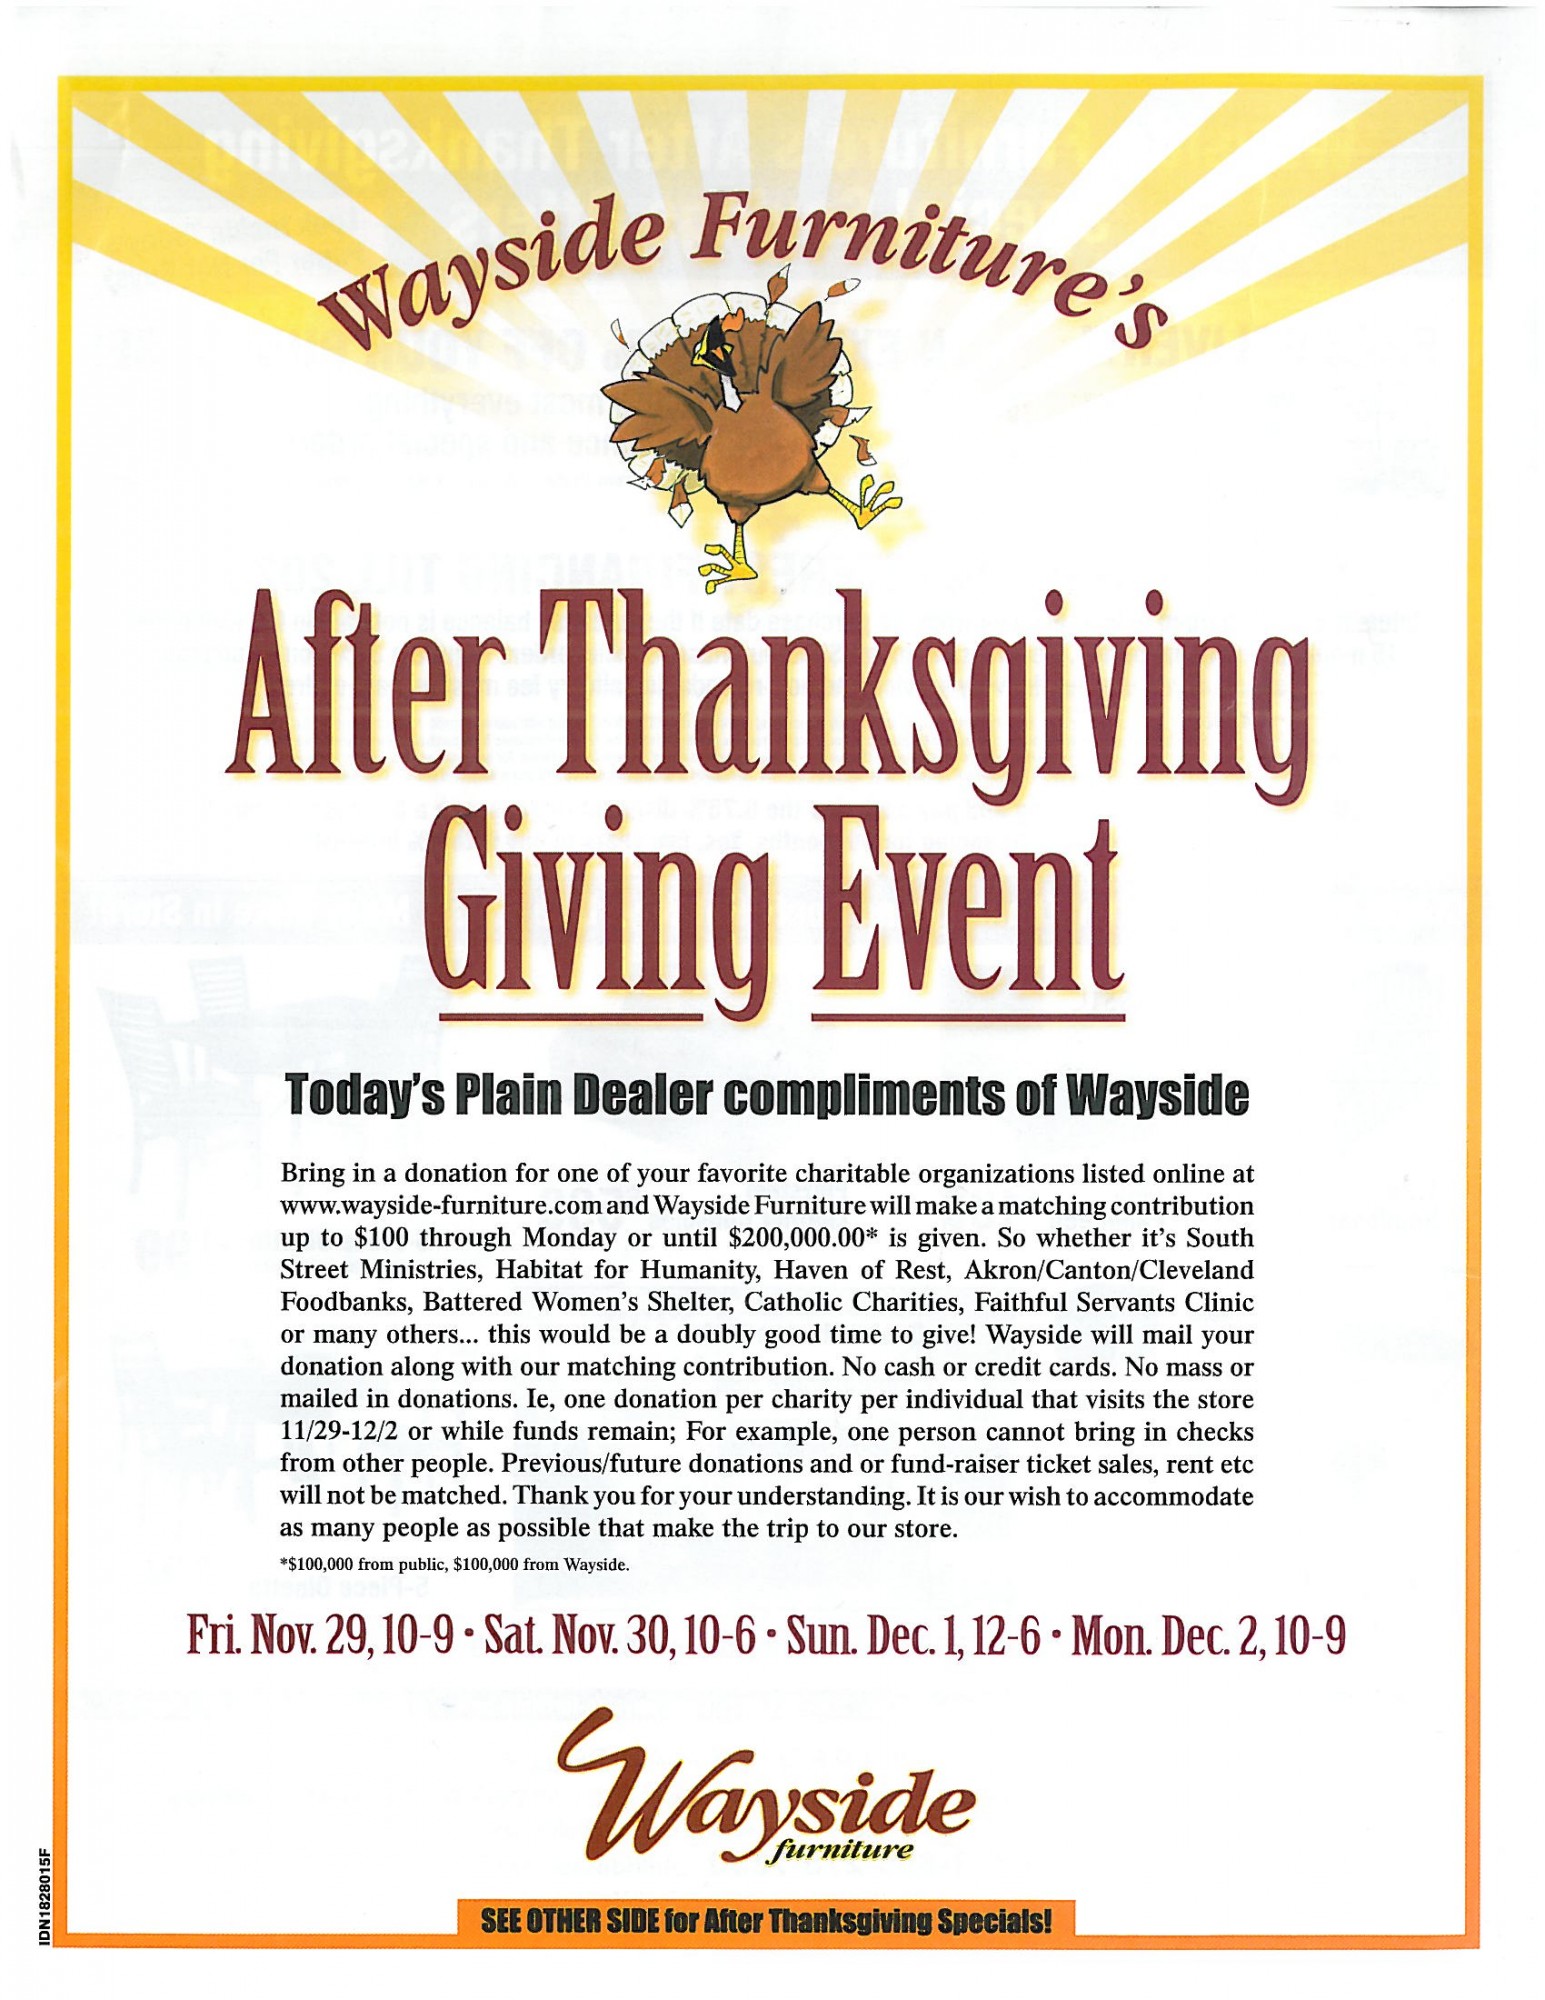 After Thanksgiving Giving Event